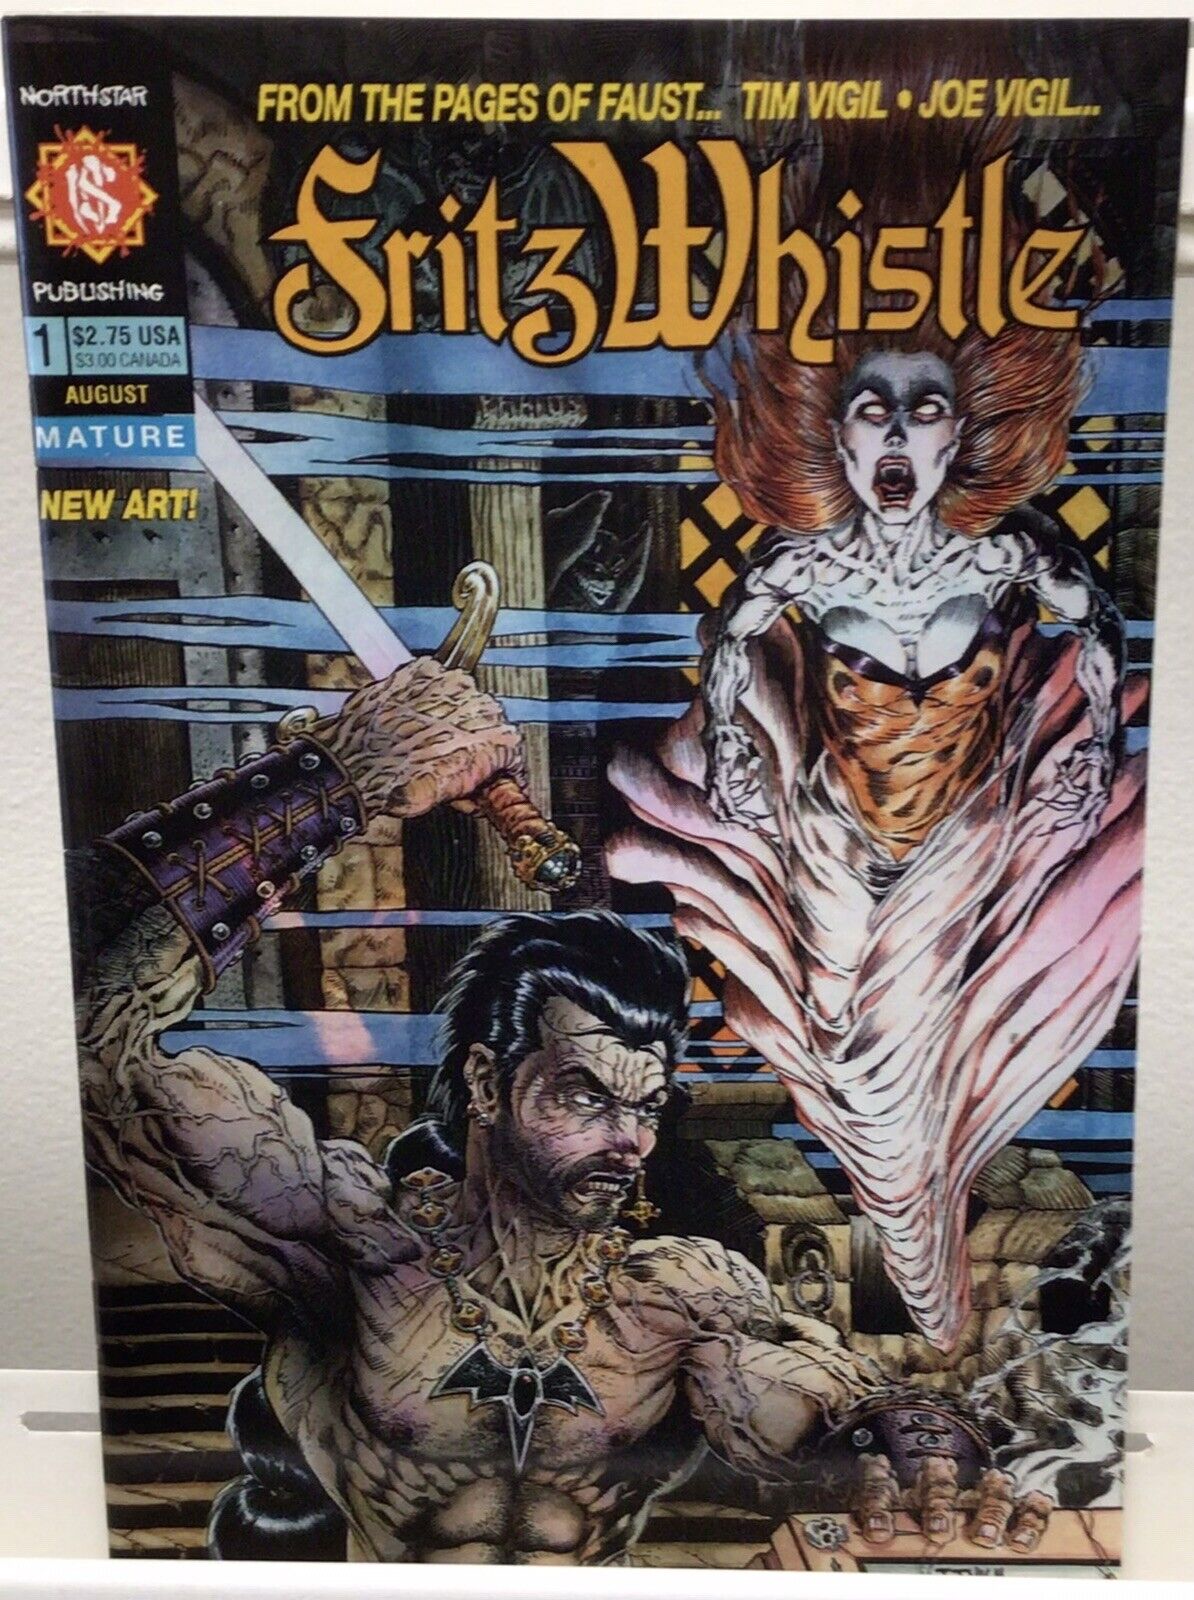 Northstar Publishing Fritz Whistle #1 Aug ‘92 Comic Book 